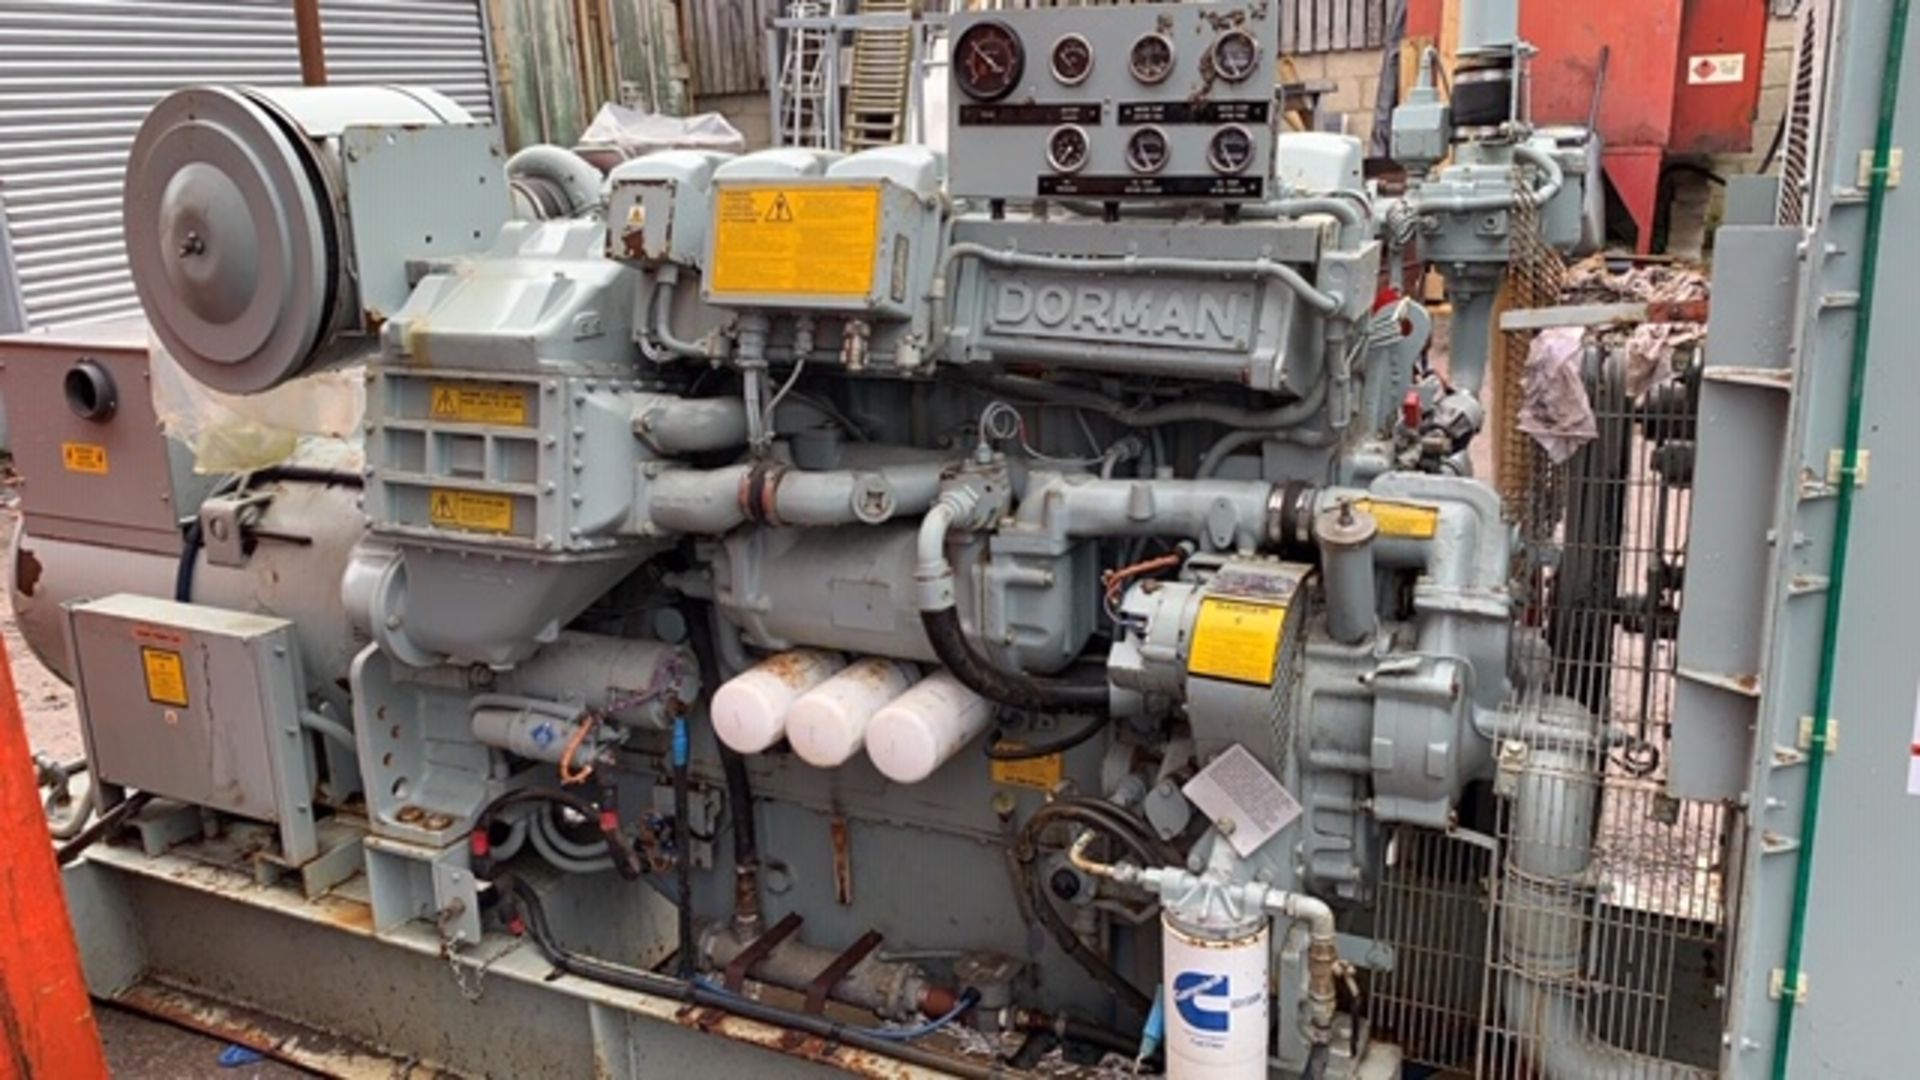 DORMAN 6 CYLINDER DIESEL ENGINED GENERATOR, FROM PAPERWORK BELIEVED TO BE 500KVA APPROX. 590HP - Image 3 of 5